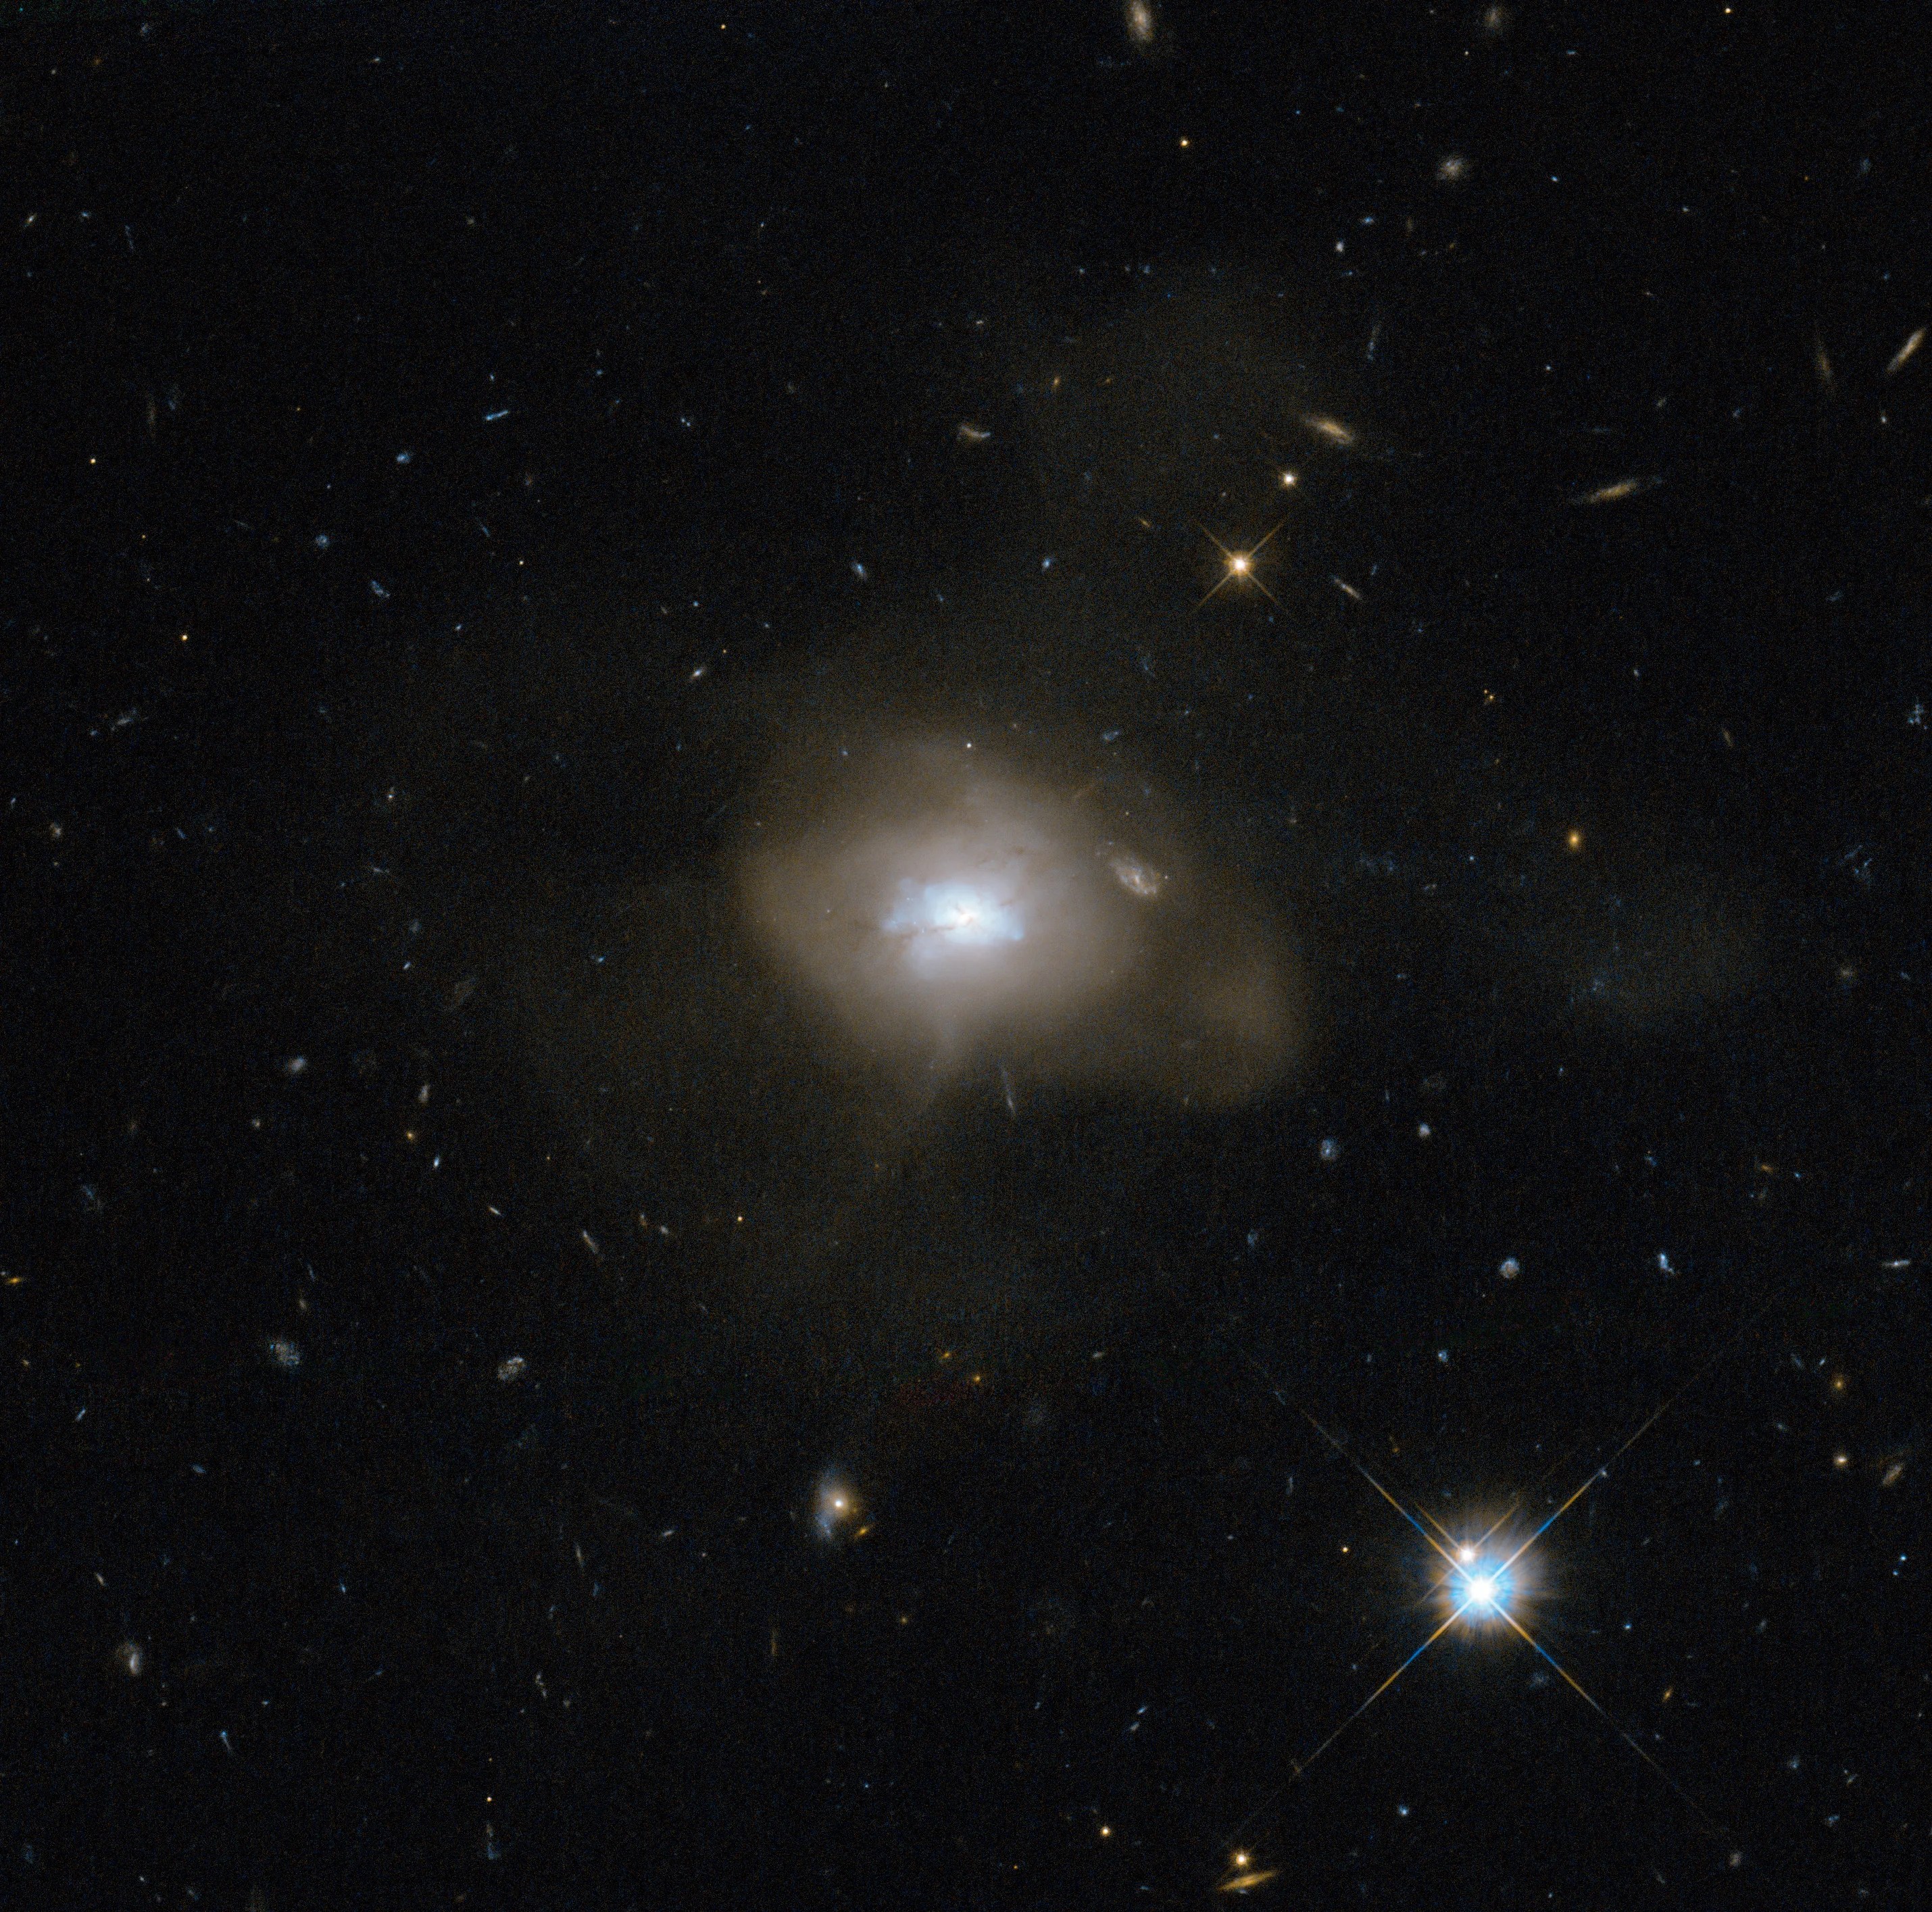 Milky, diffuse assymetrical galaxy